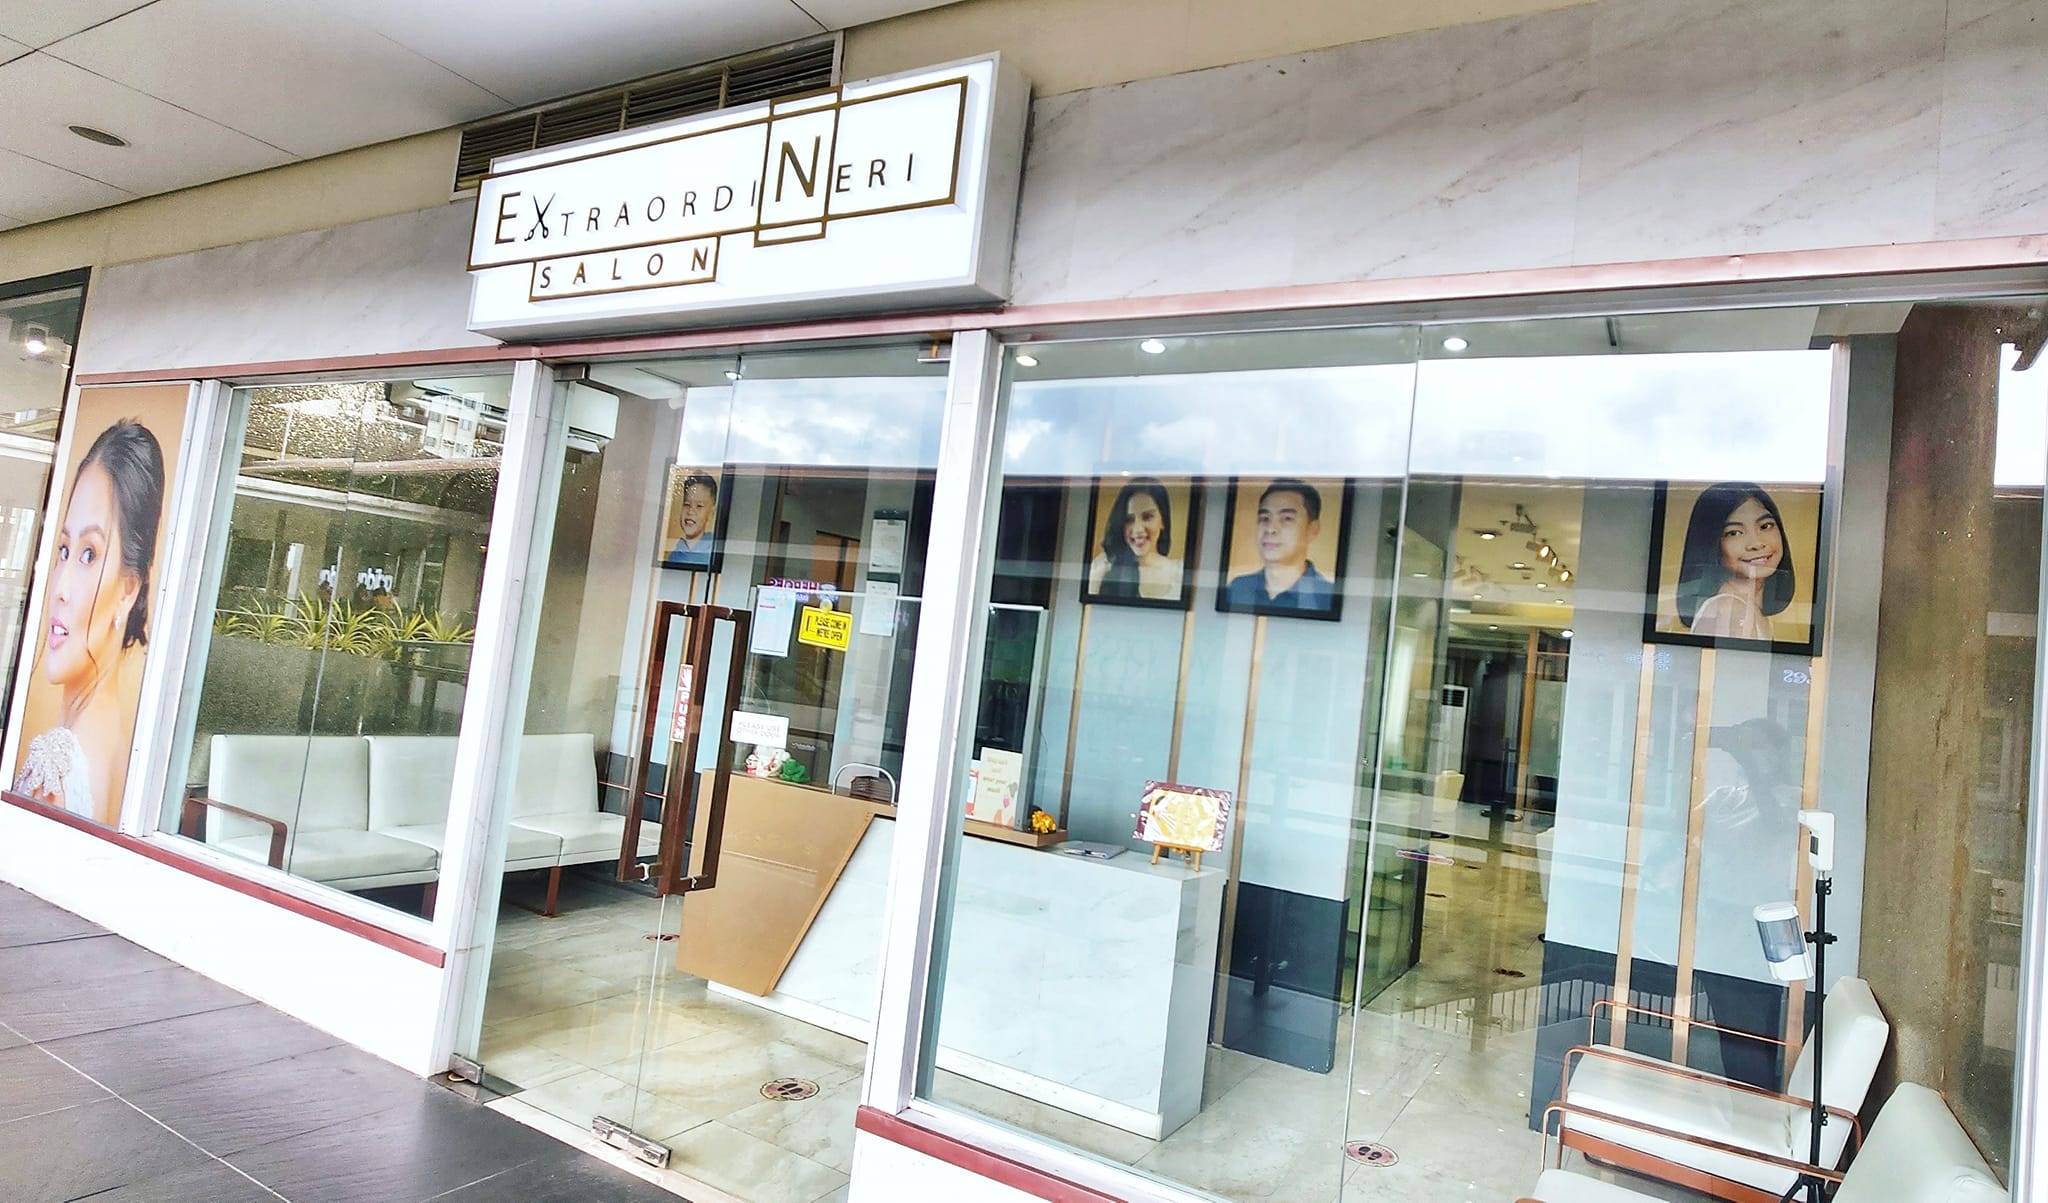 Neri Naig Buys A Failing Salon To Save Employees From Losing Their Jobs